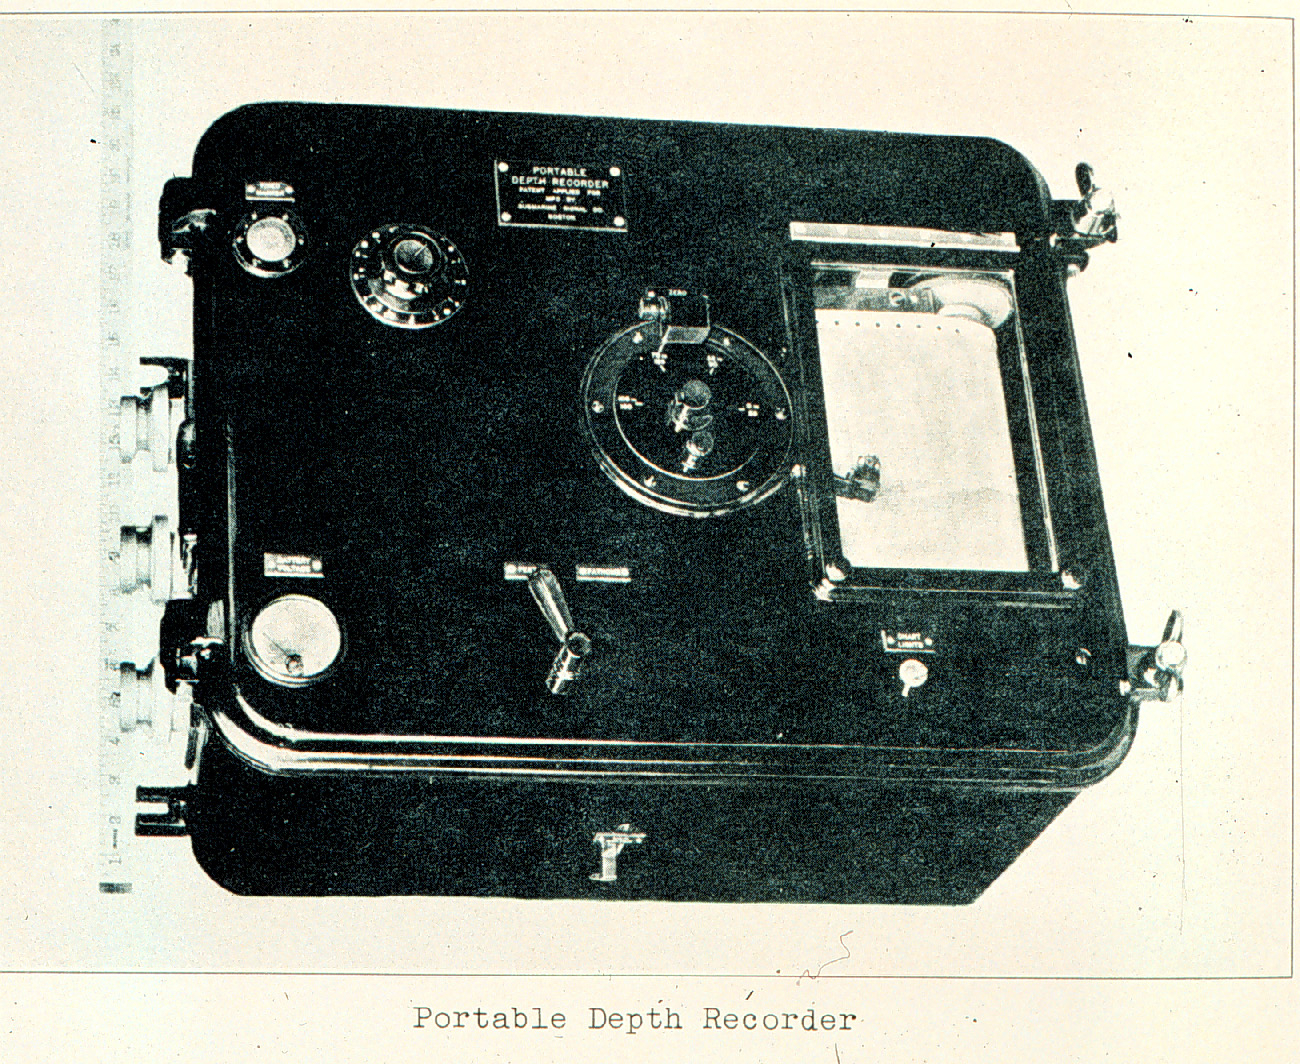 Prototype portable depth recorder used as part of 808 fathometer system